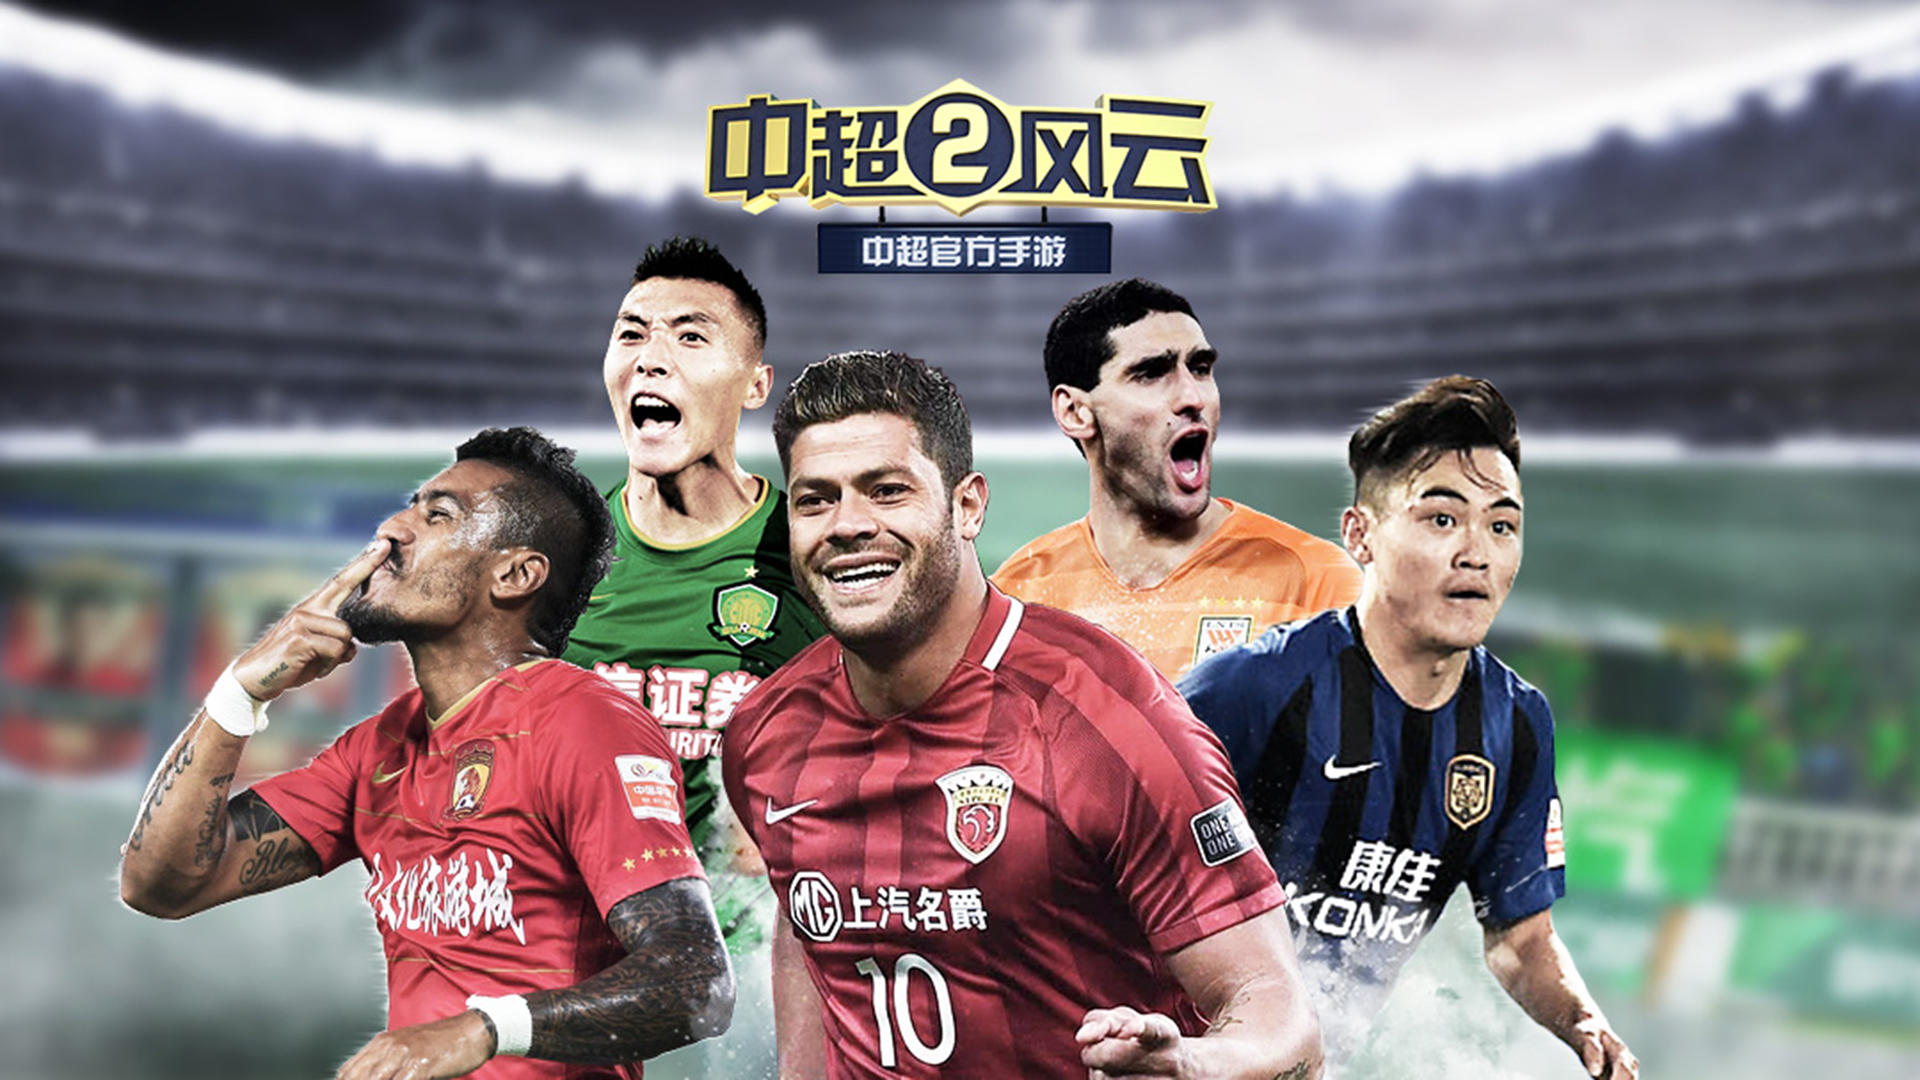 Banner of Super Ligue chinoise 2 